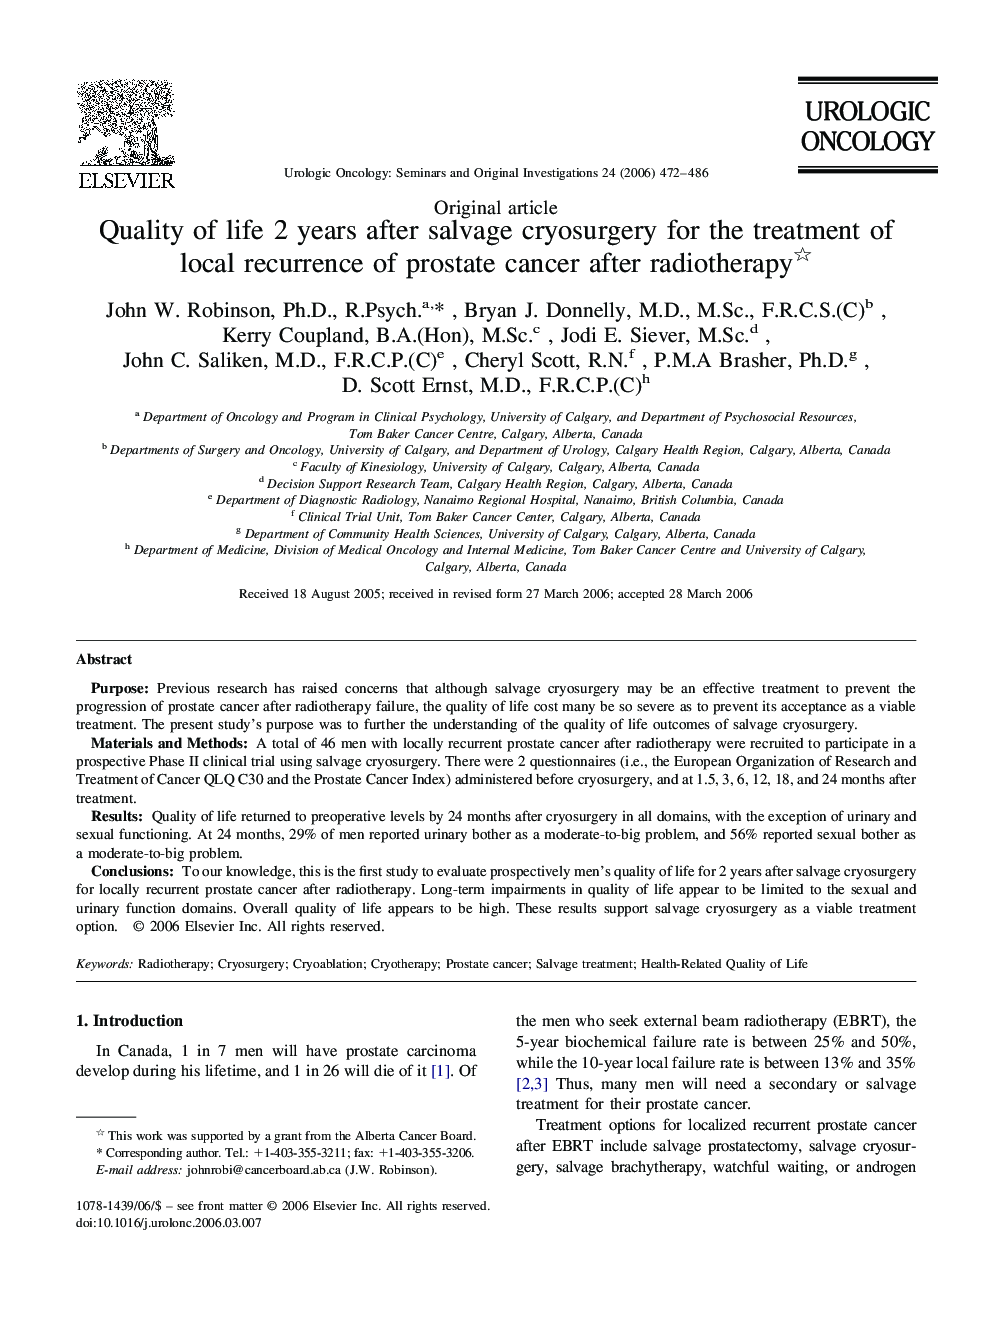 Quality of life 2 years after salvage cryosurgery for the treatment of local recurrence of prostate cancer after radiotherapy